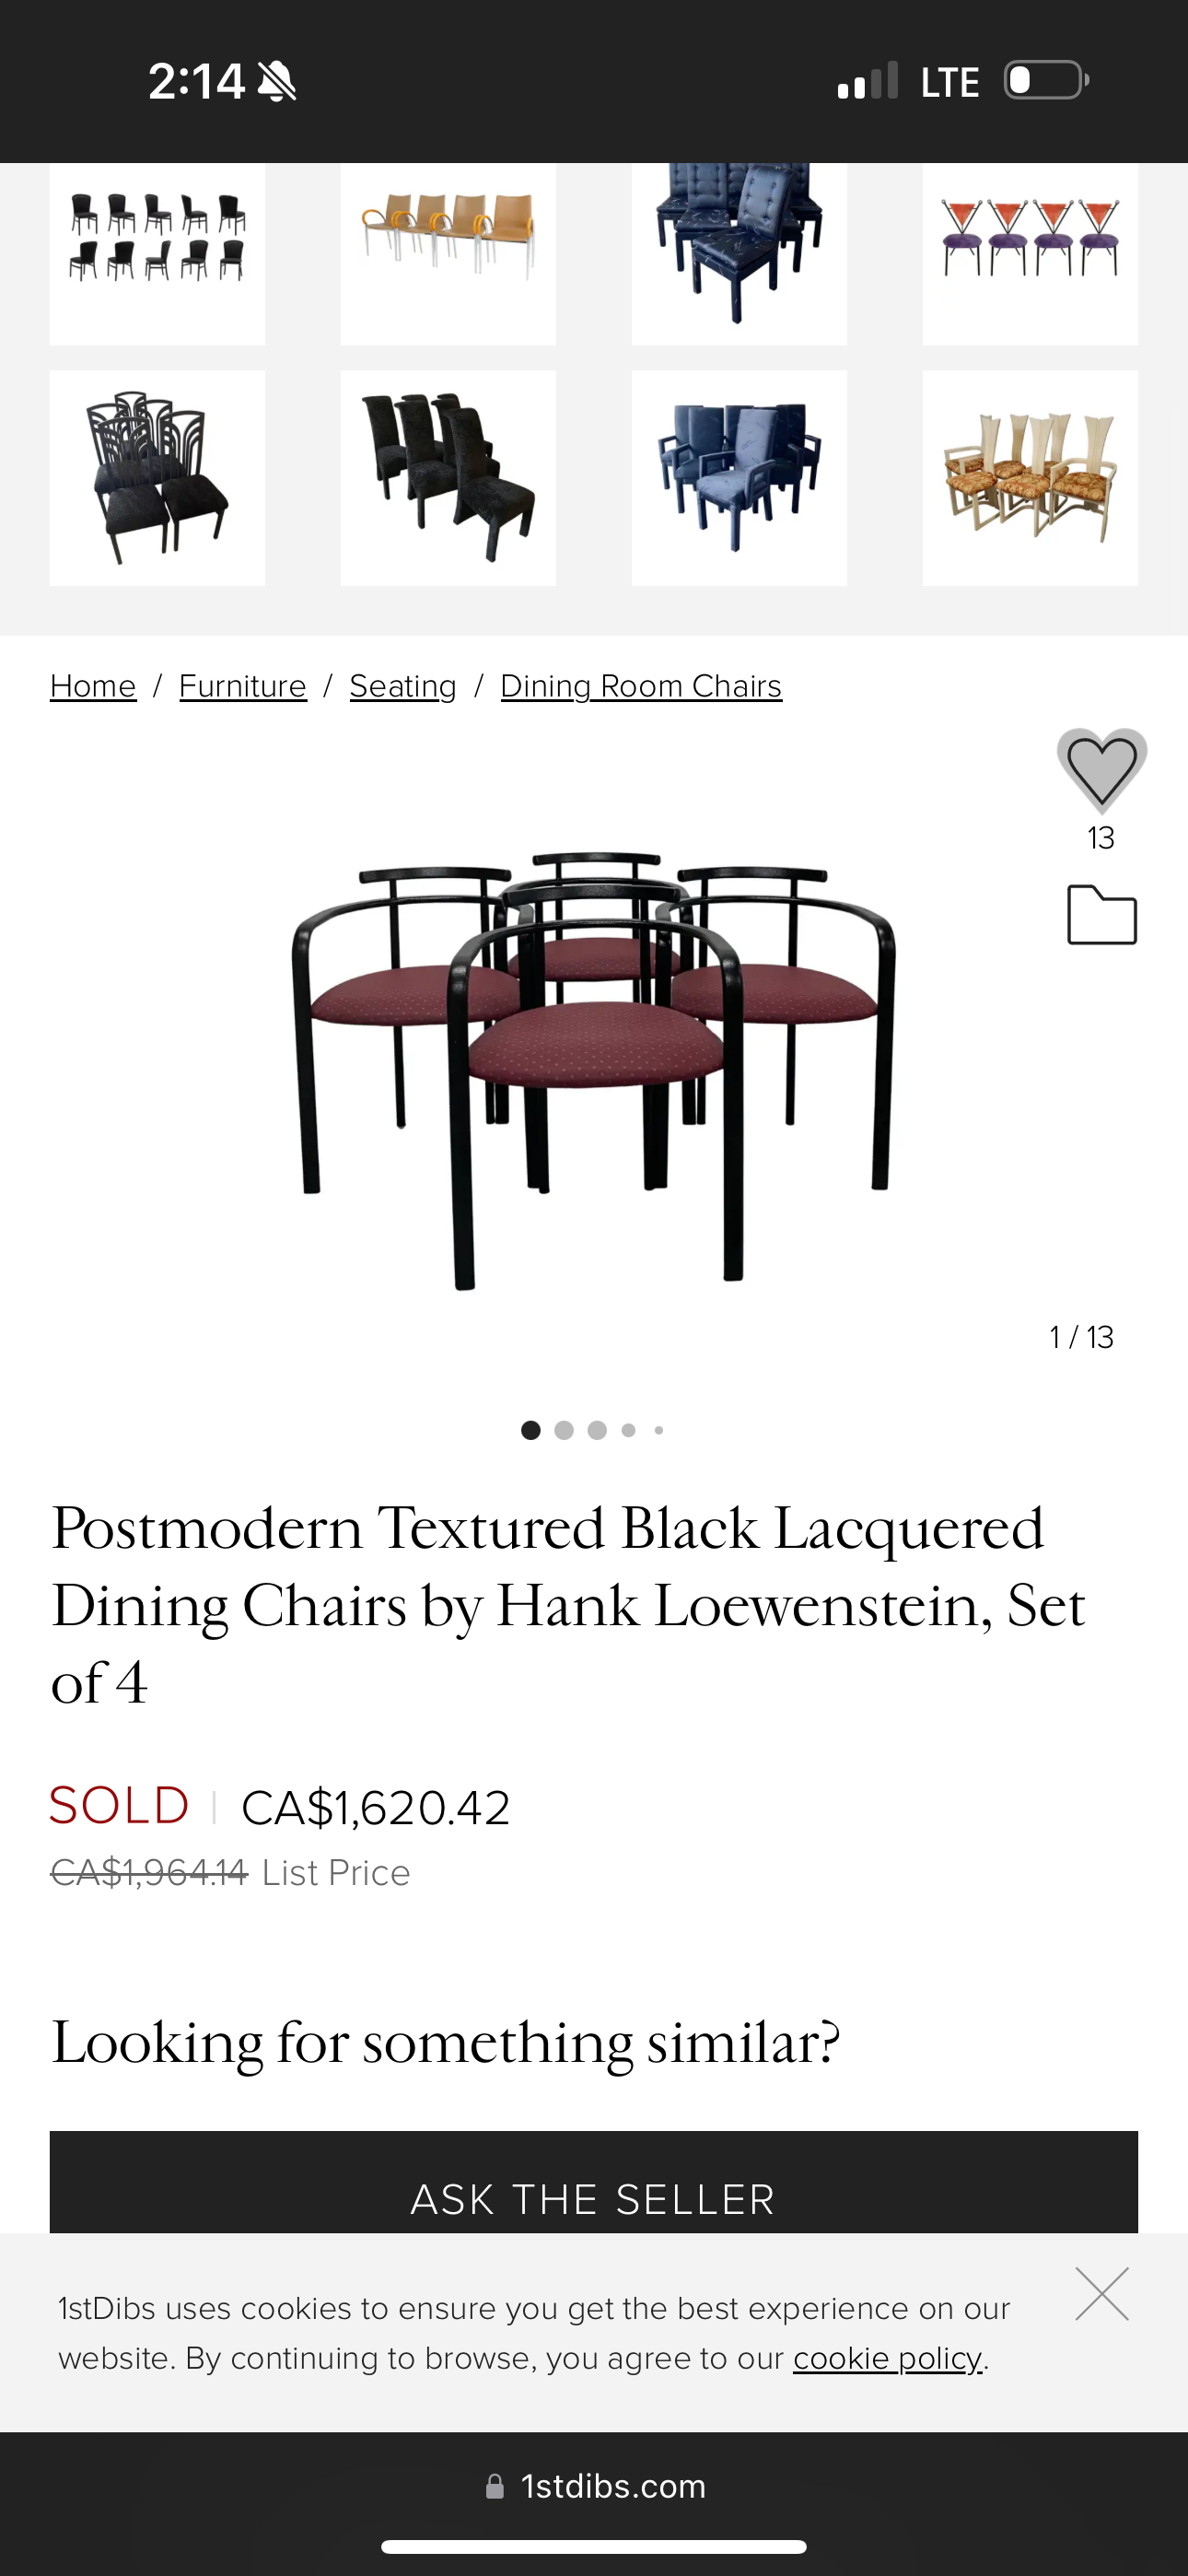 The H. Lowenstein Dining Chairs